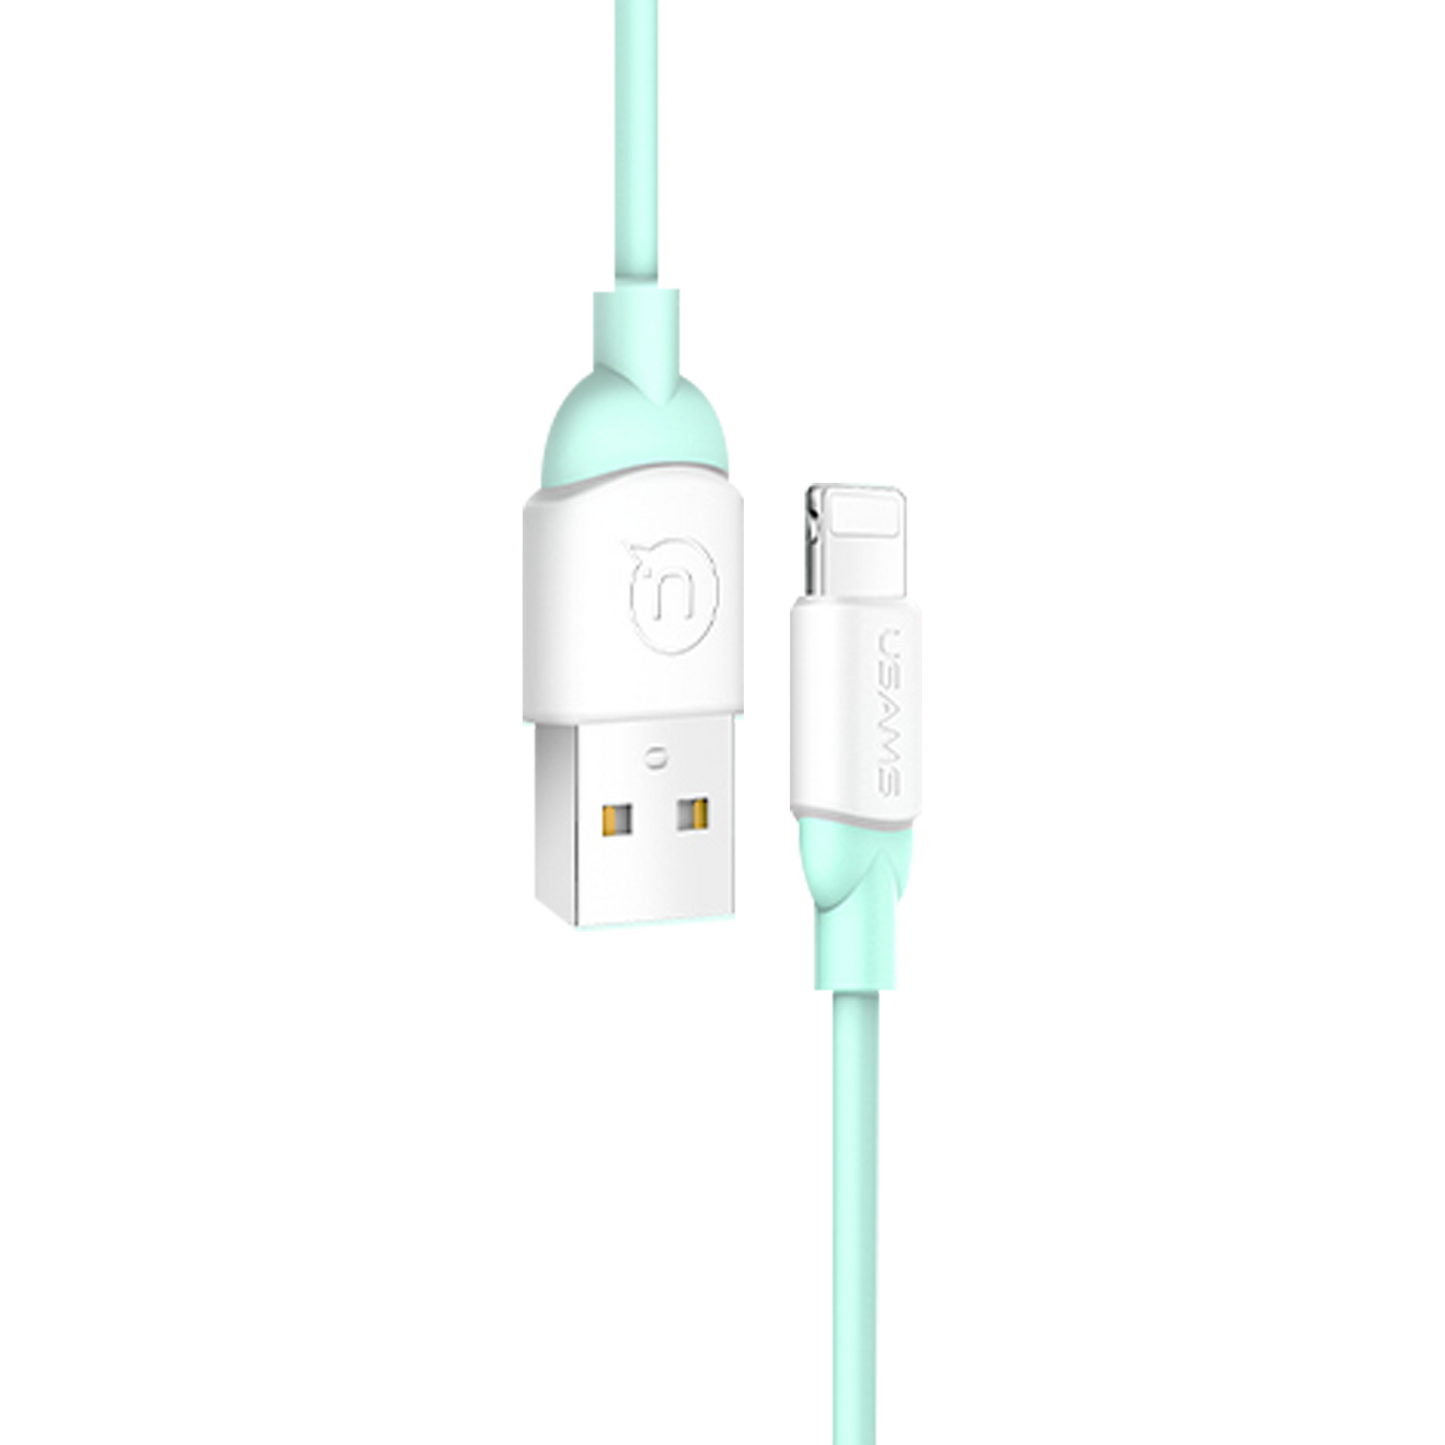 Usams Ice-cream Series Lightning Charging and Data Cable US-SJ245